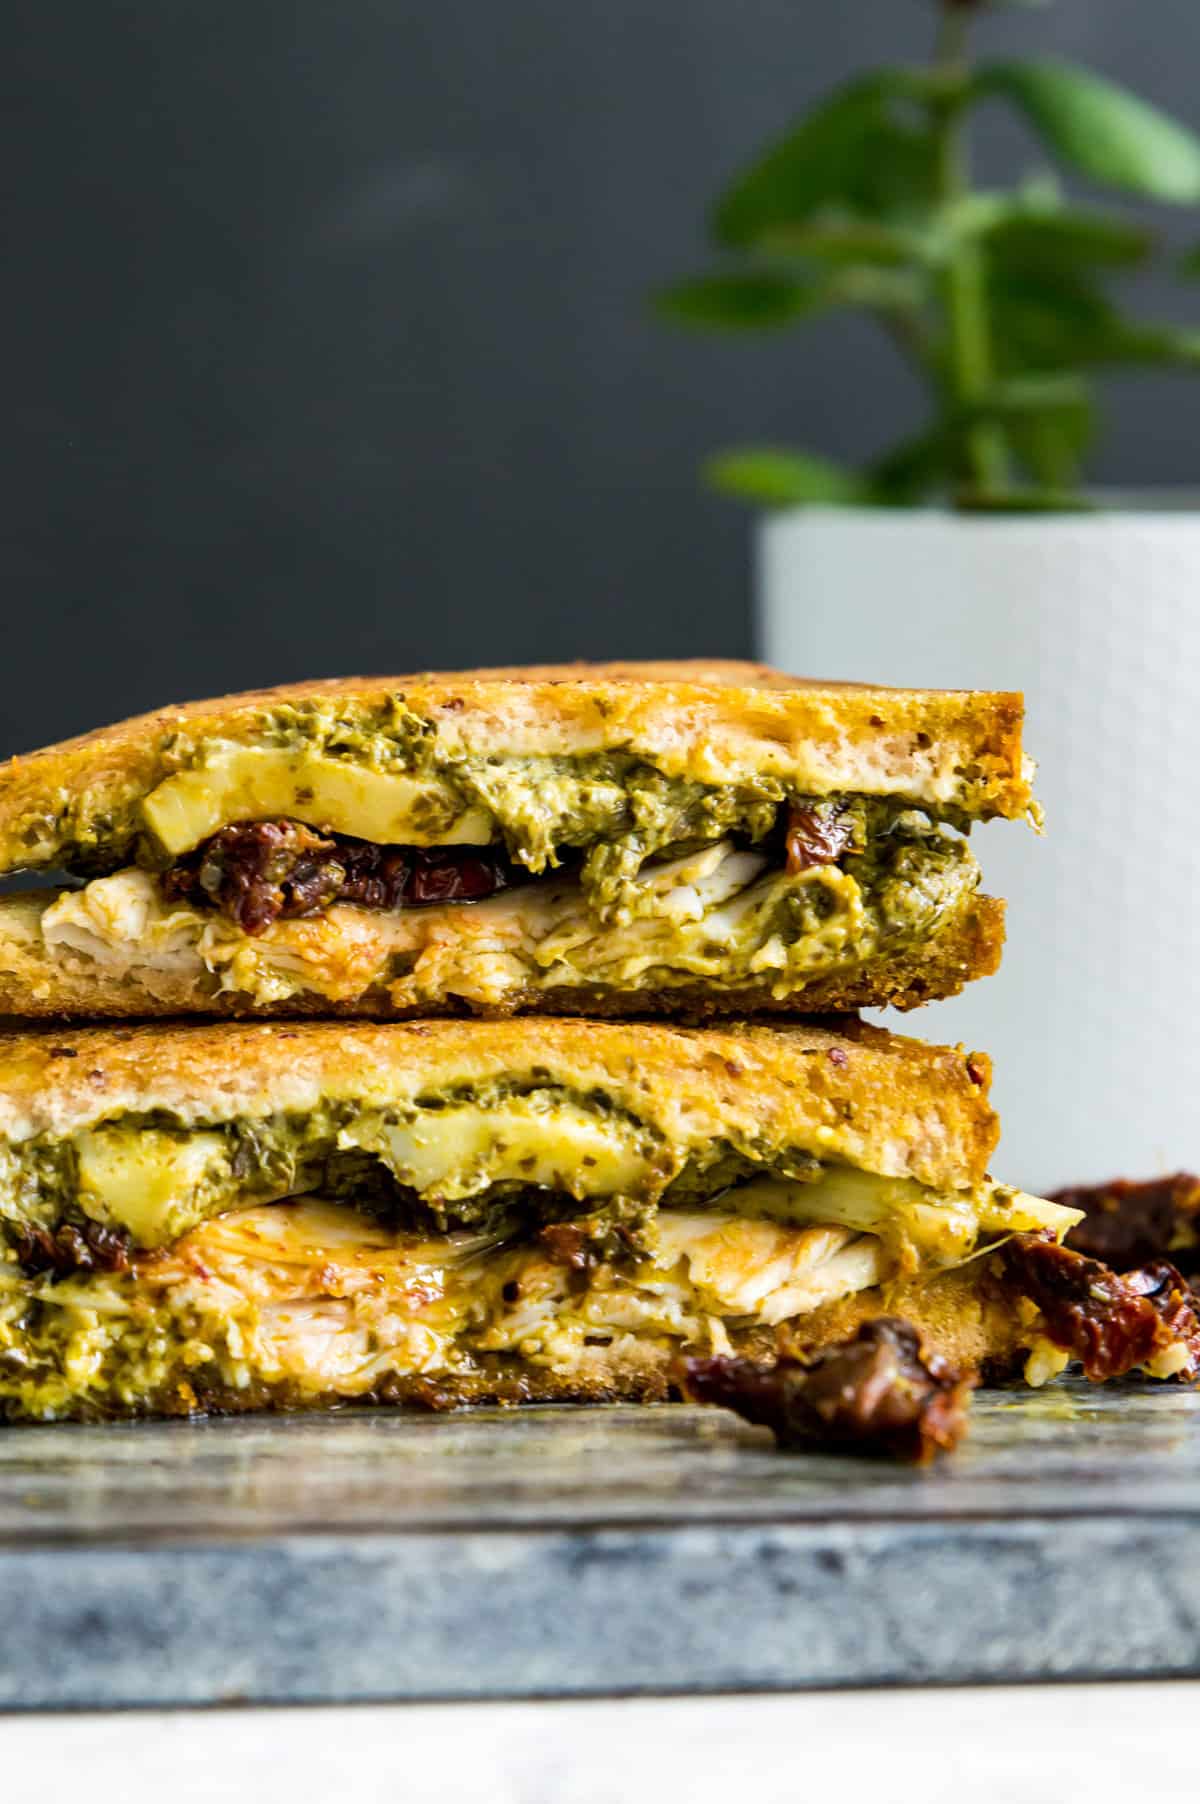 A stack of turkey pesto sandwich with cheese, sun-dried tomatoes, turkey and bread.